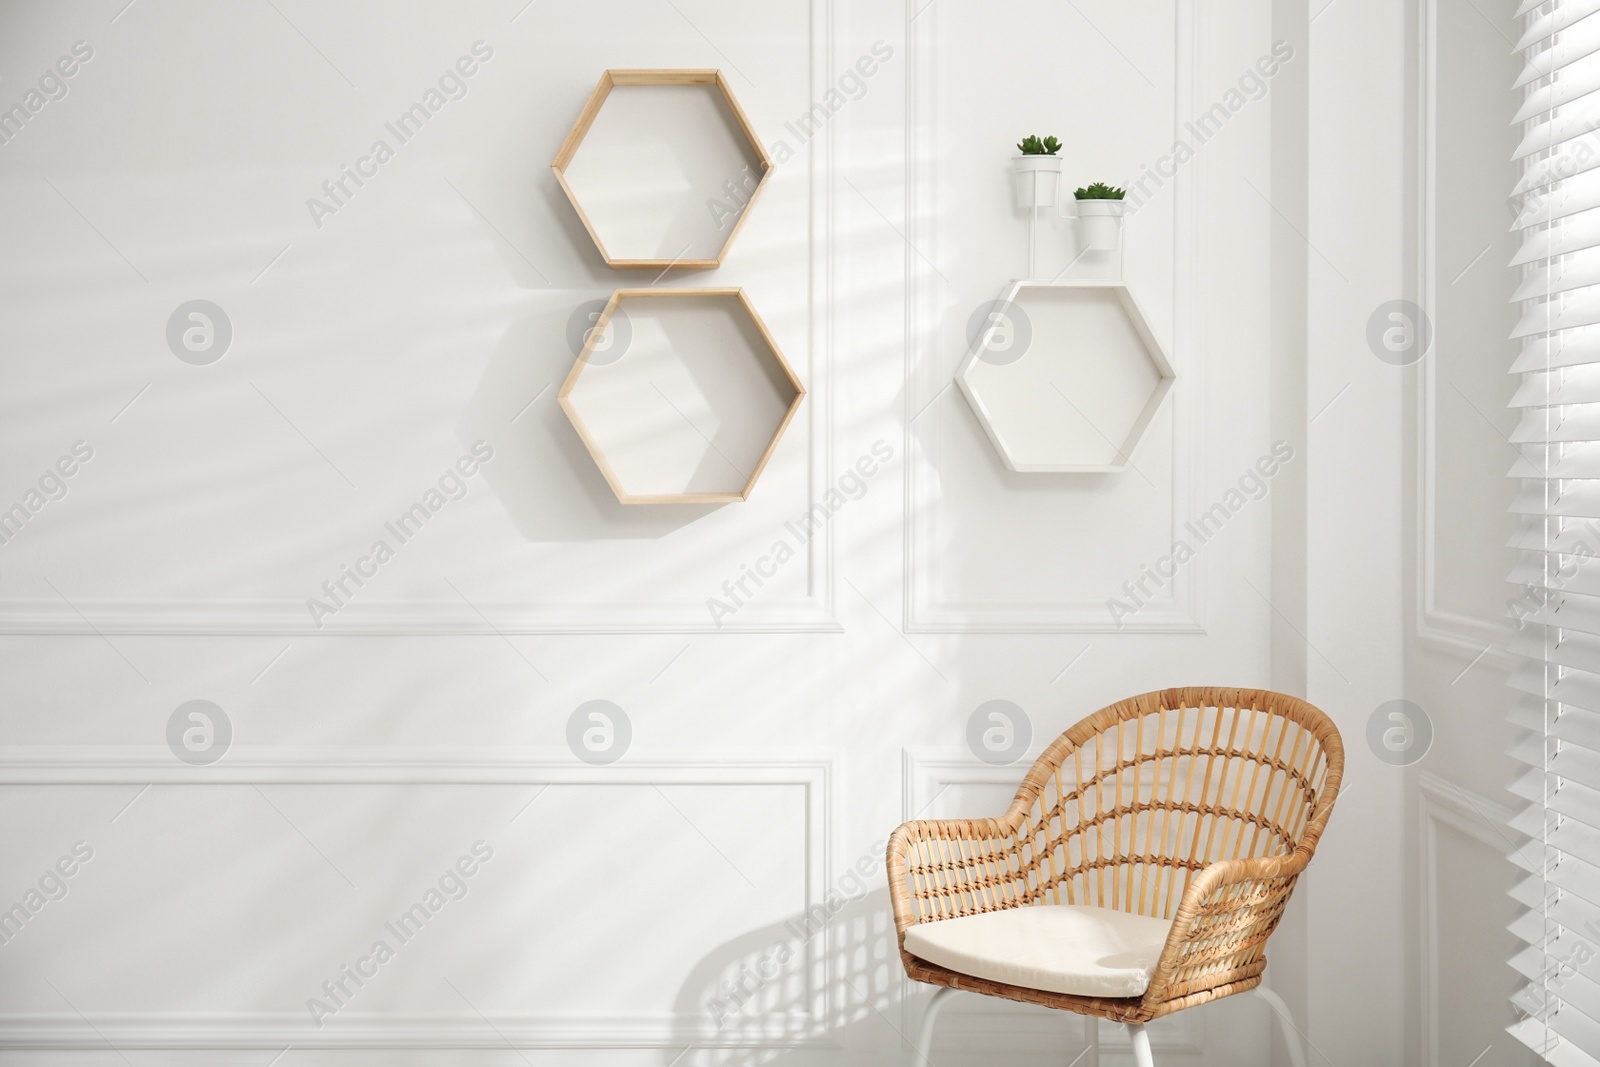 Photo of Honeycomb shaped shelves with plants on white wall indoors